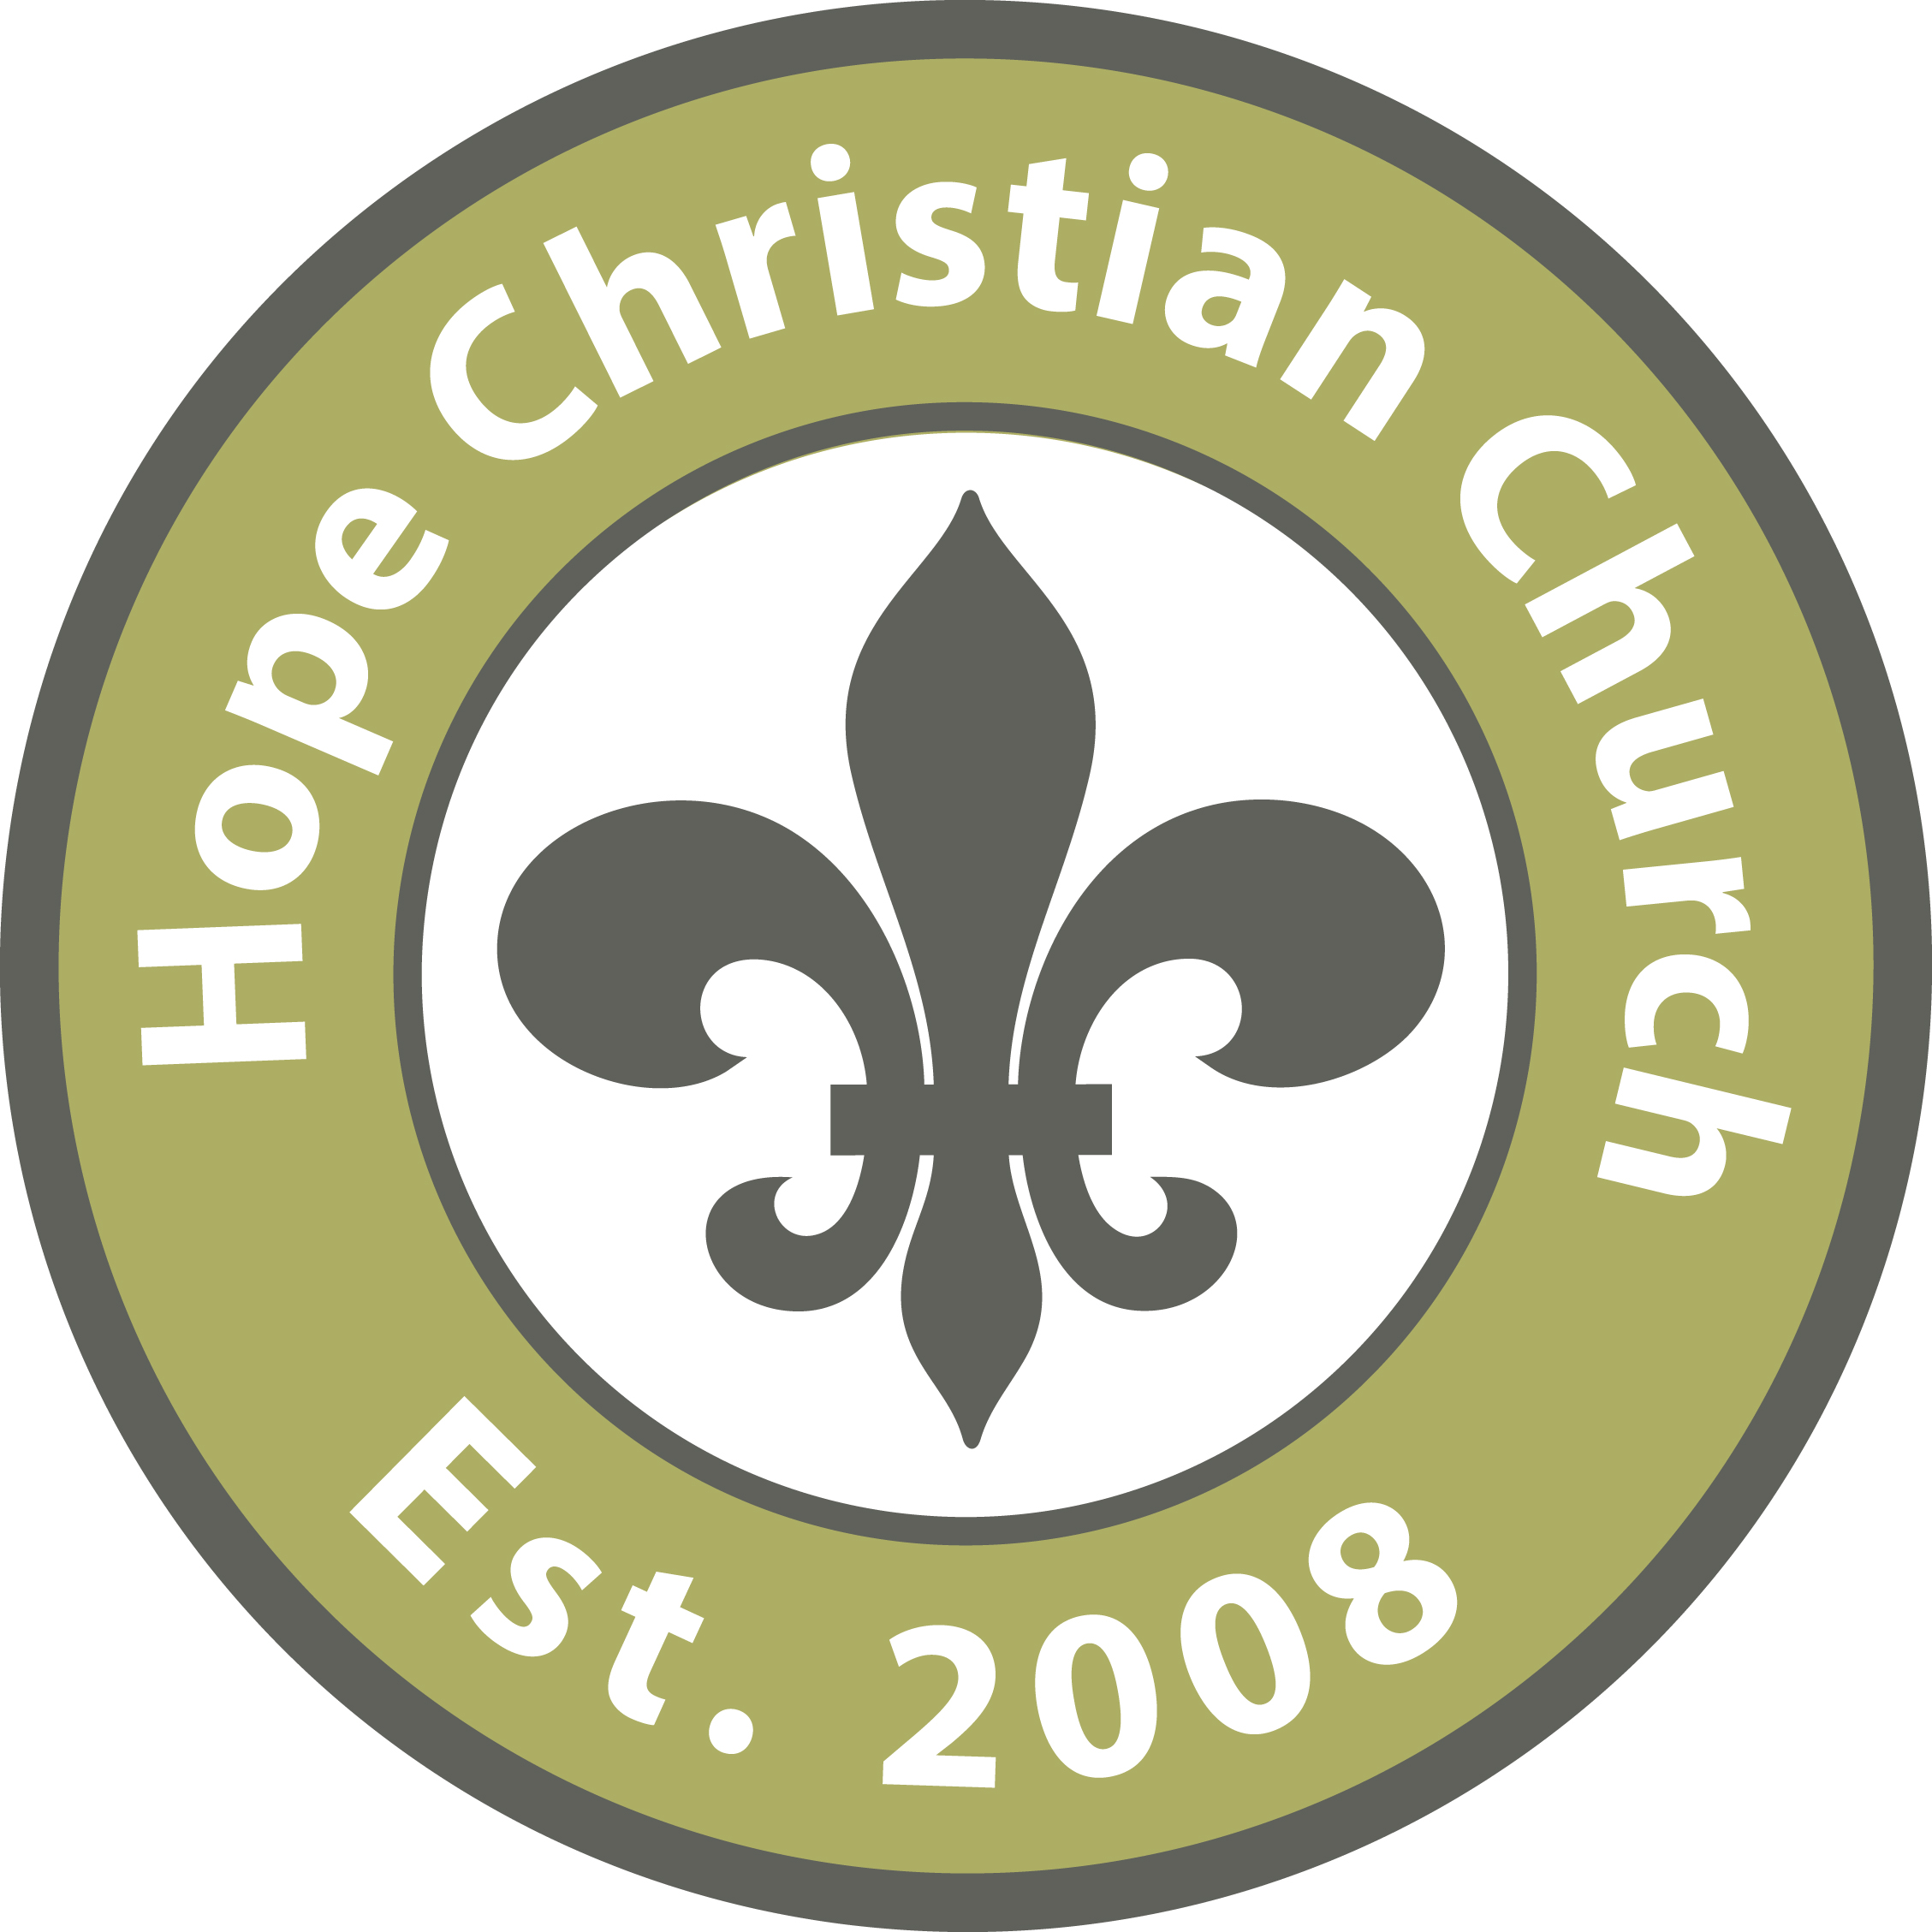 Hope Christian Church of New Orleans